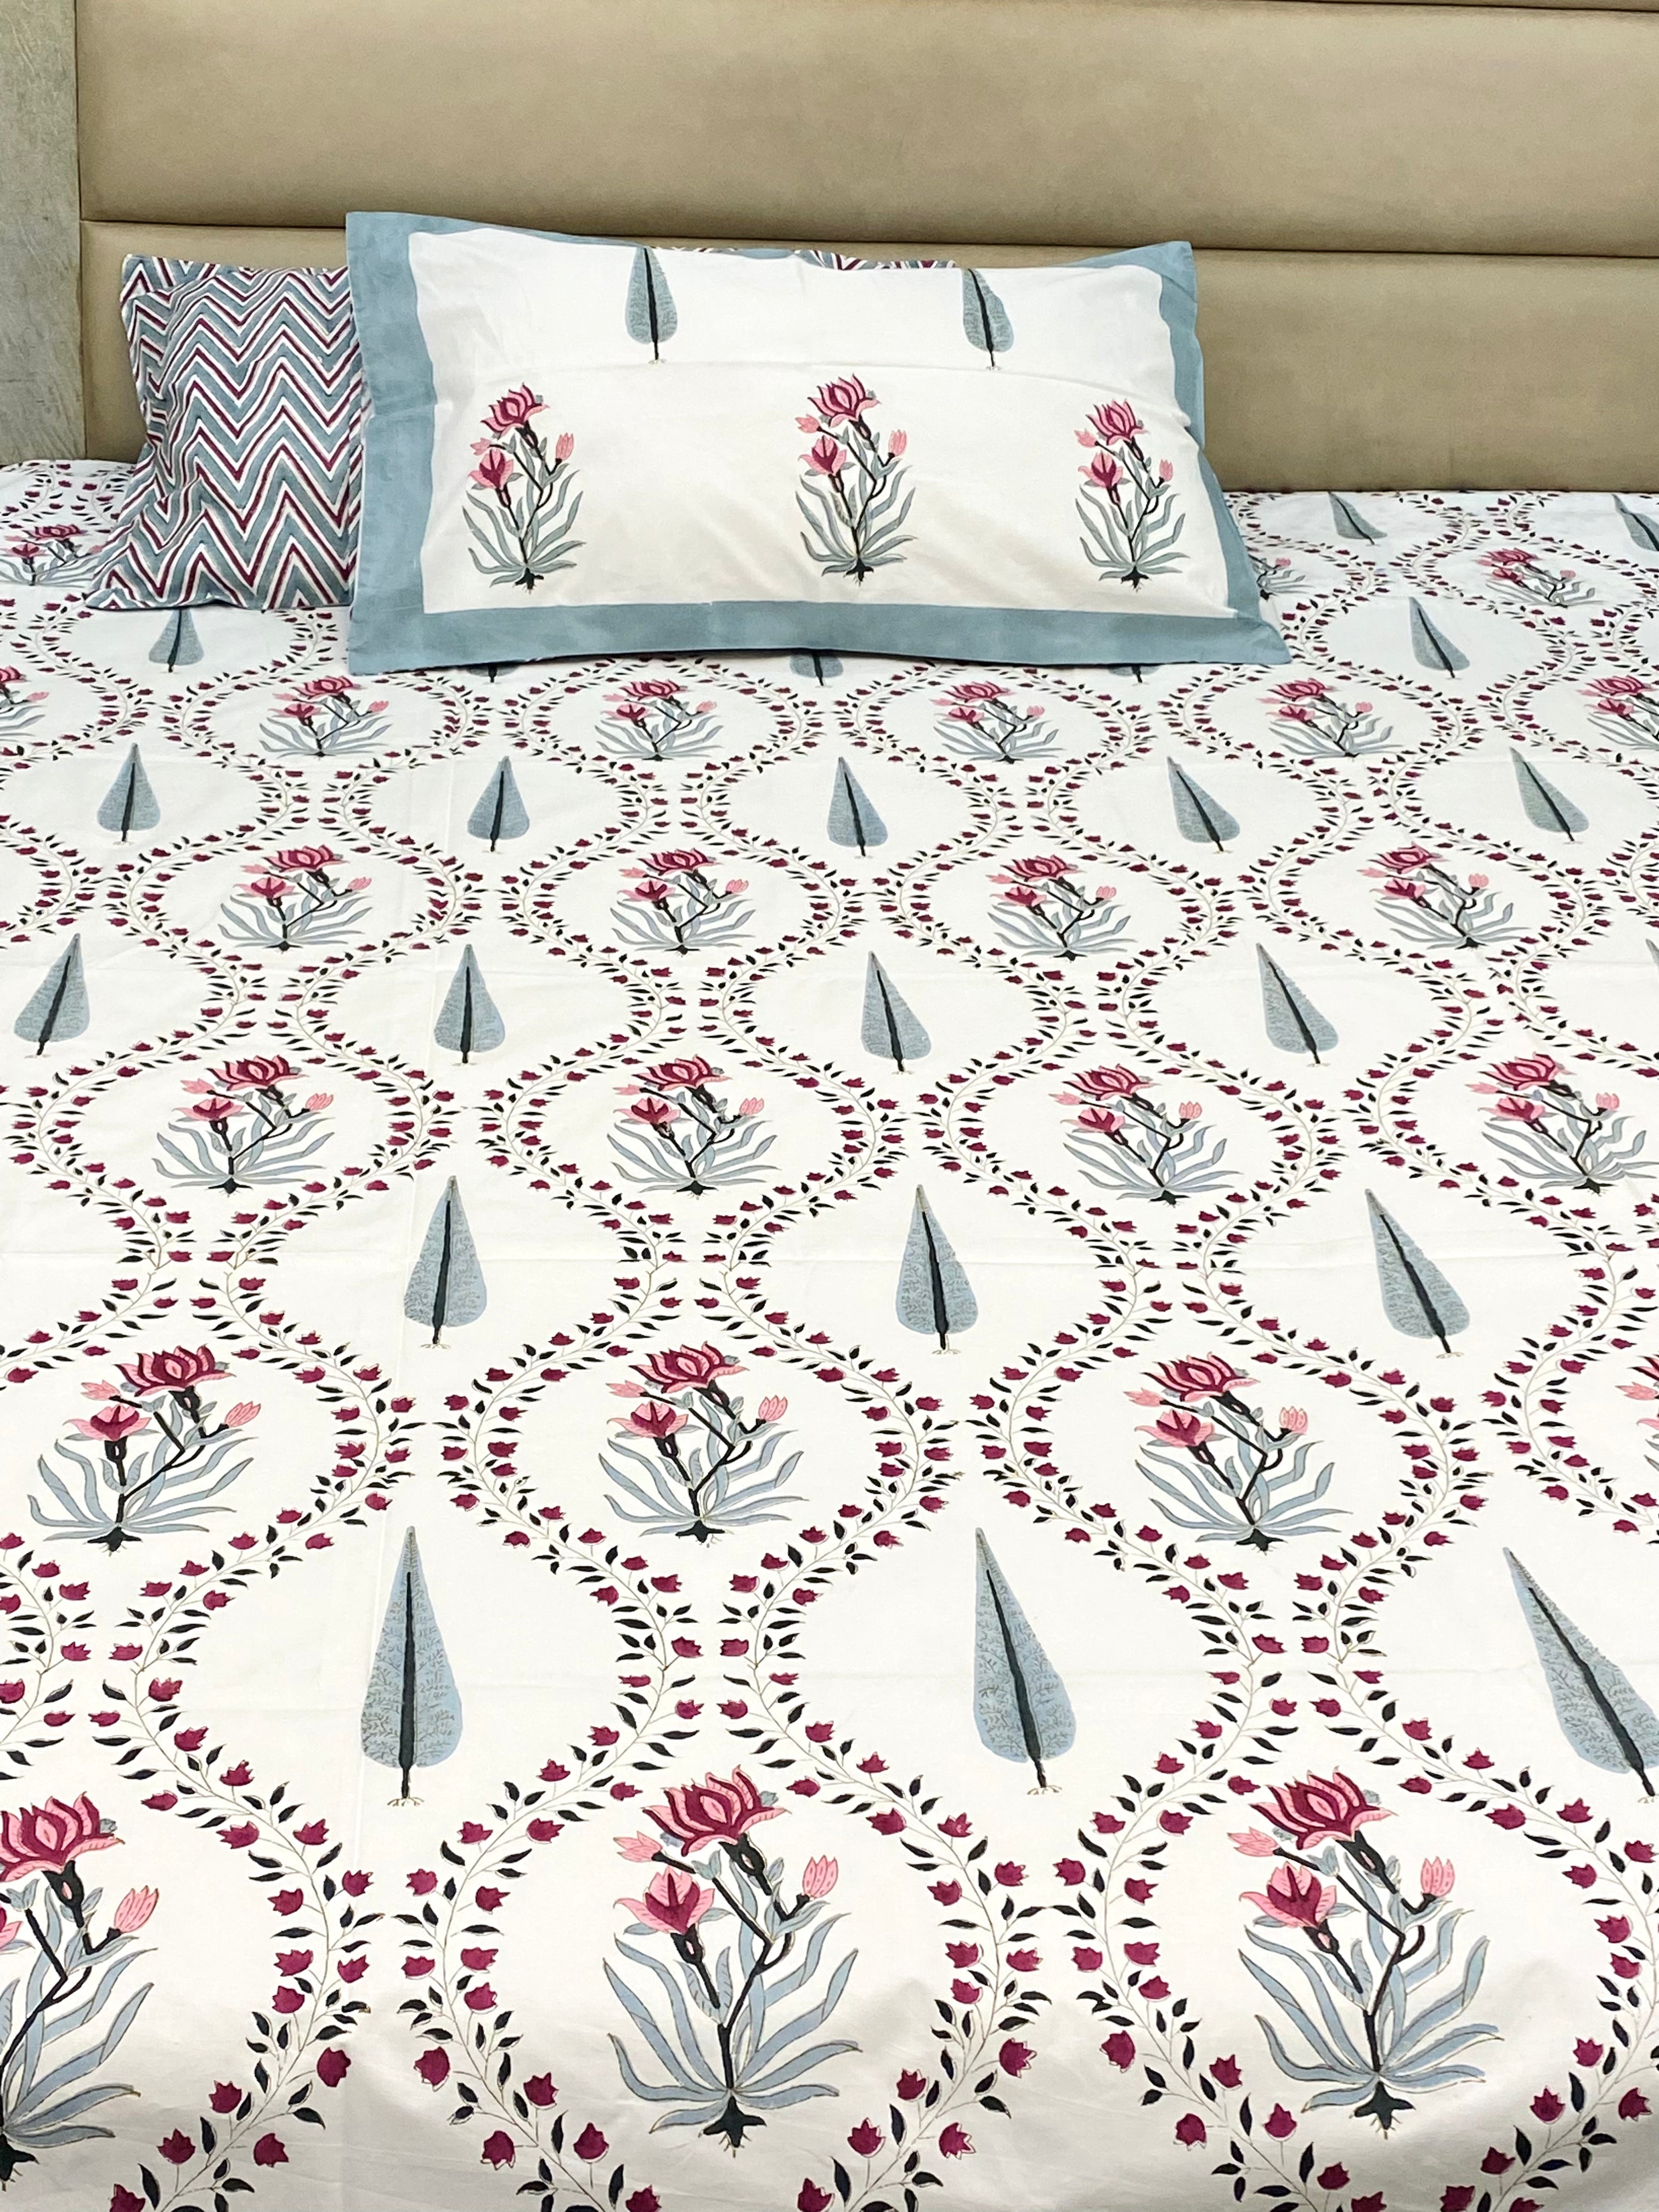 Blockprint Cotton Bedsheet -Double Size (90 * 108 inches)